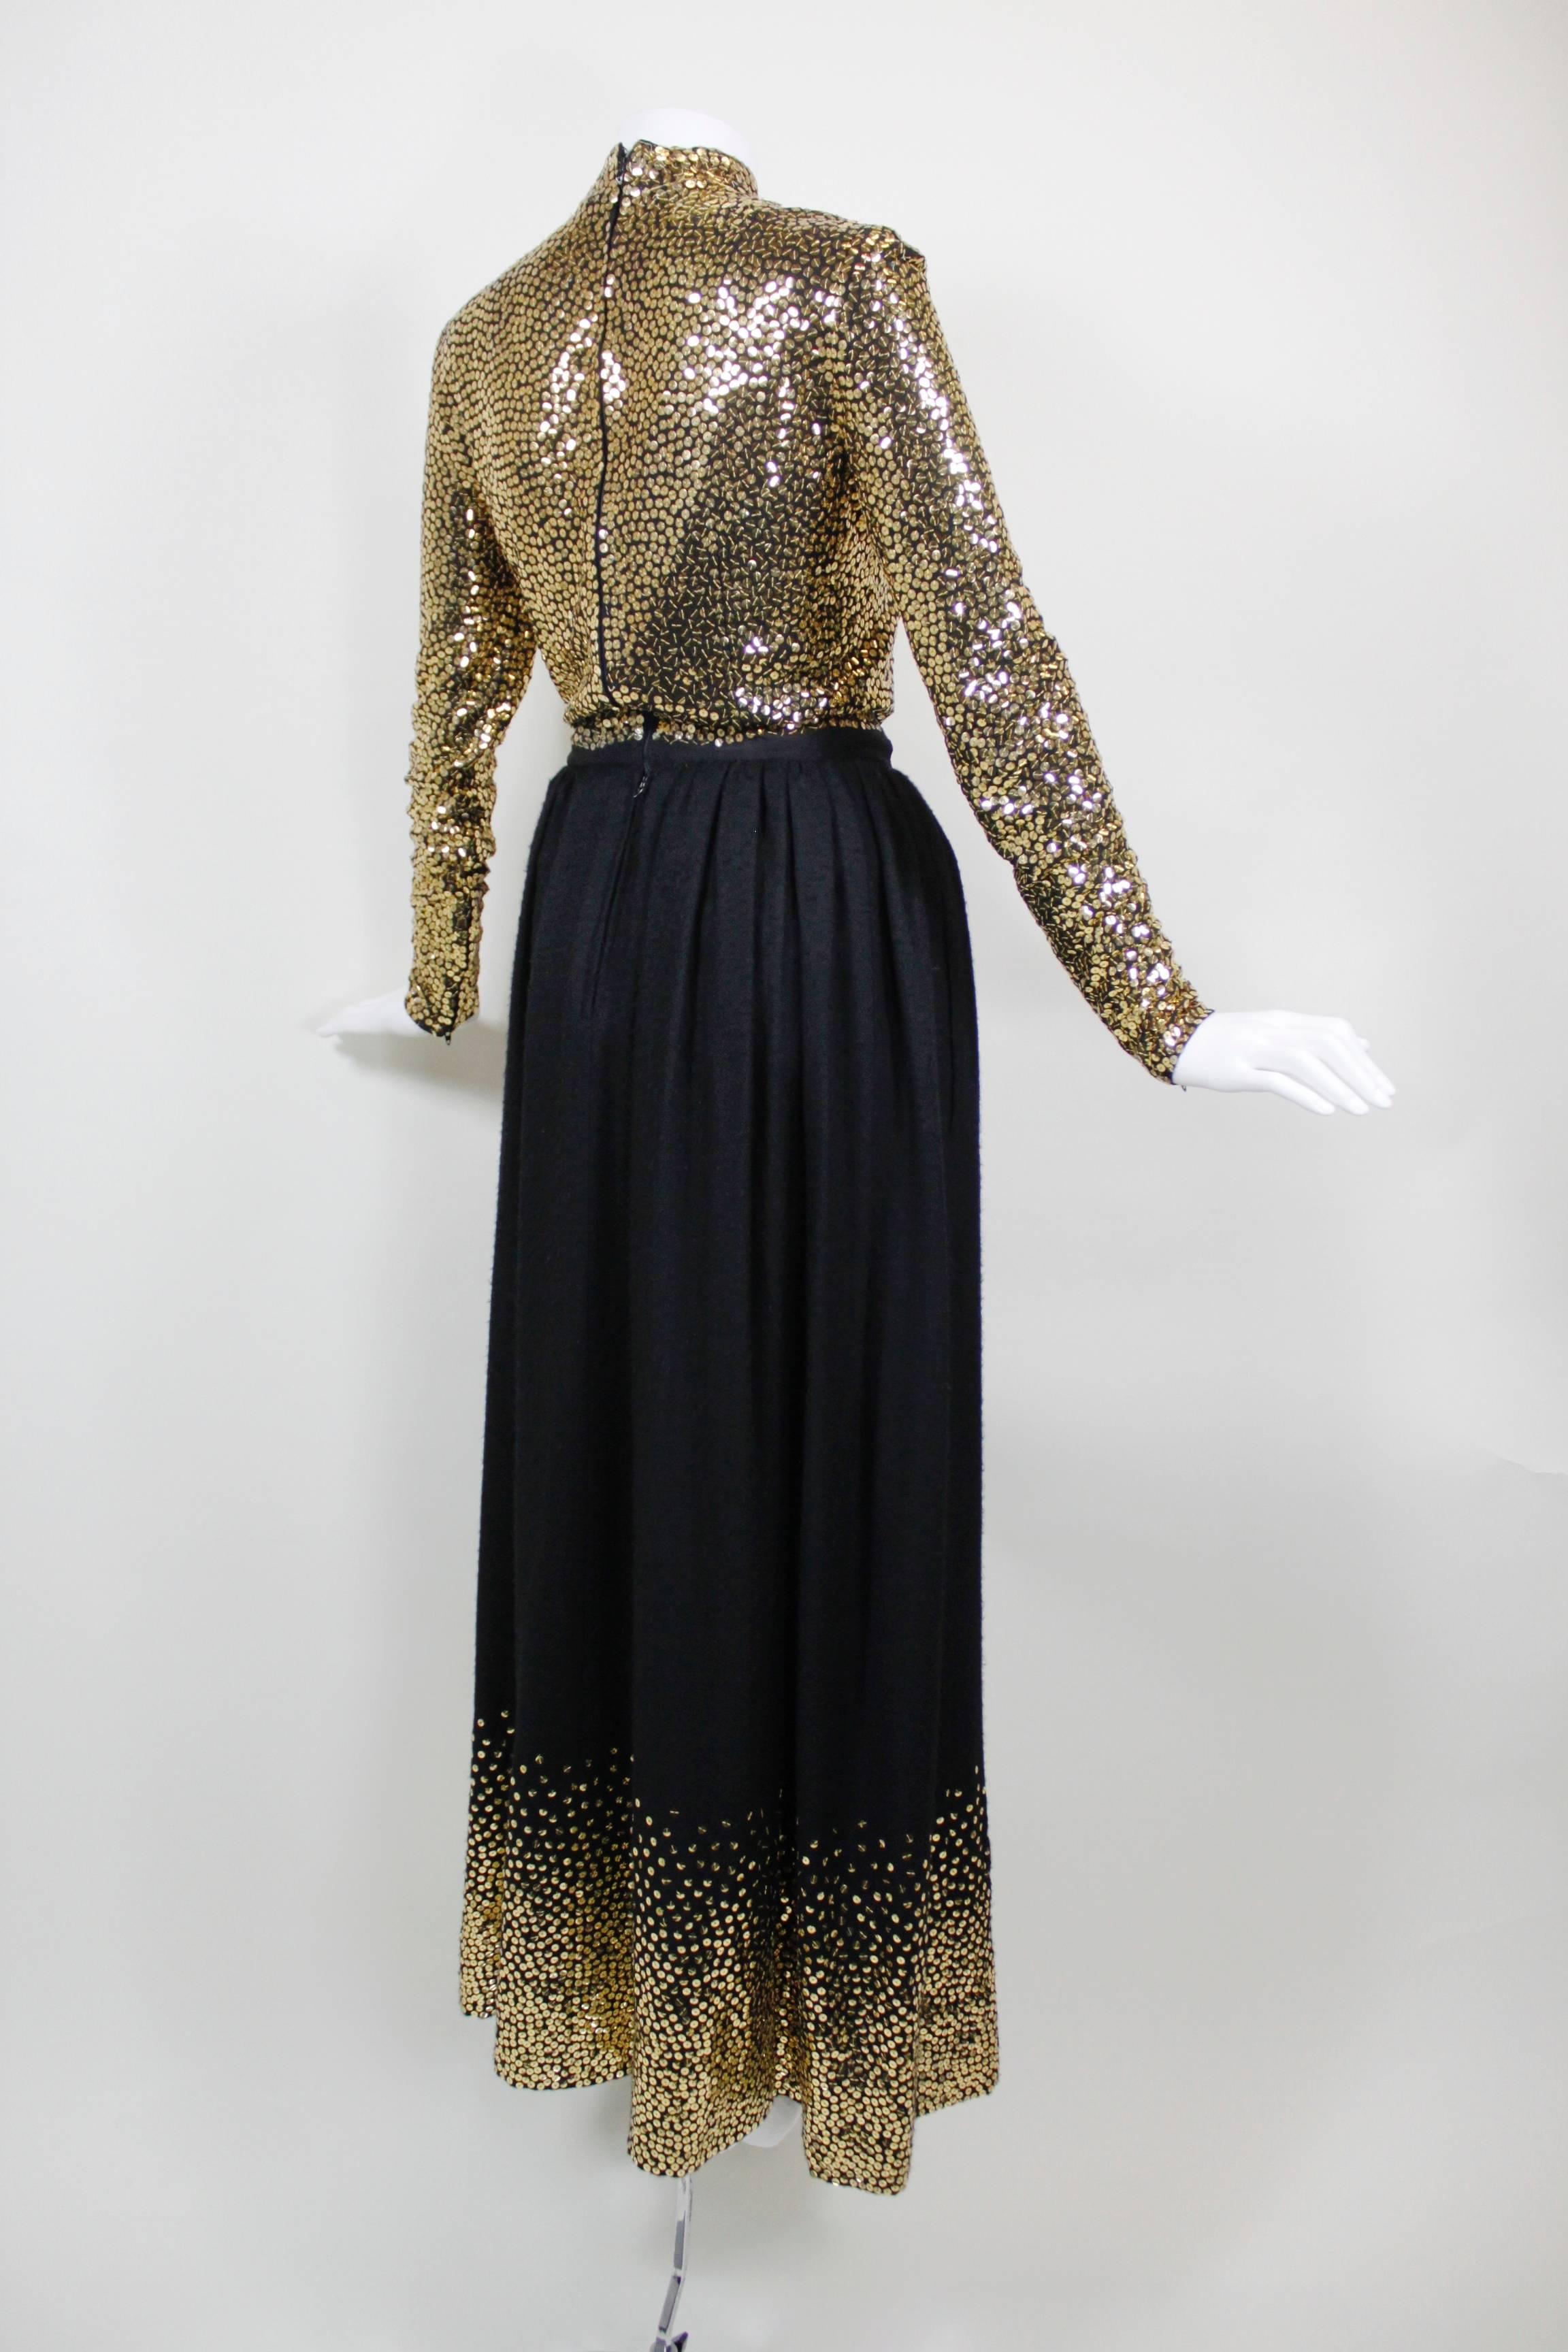 1970s Norell Evening Gown with Gold Sequin Embellishment In Excellent Condition For Sale In Los Angeles, CA